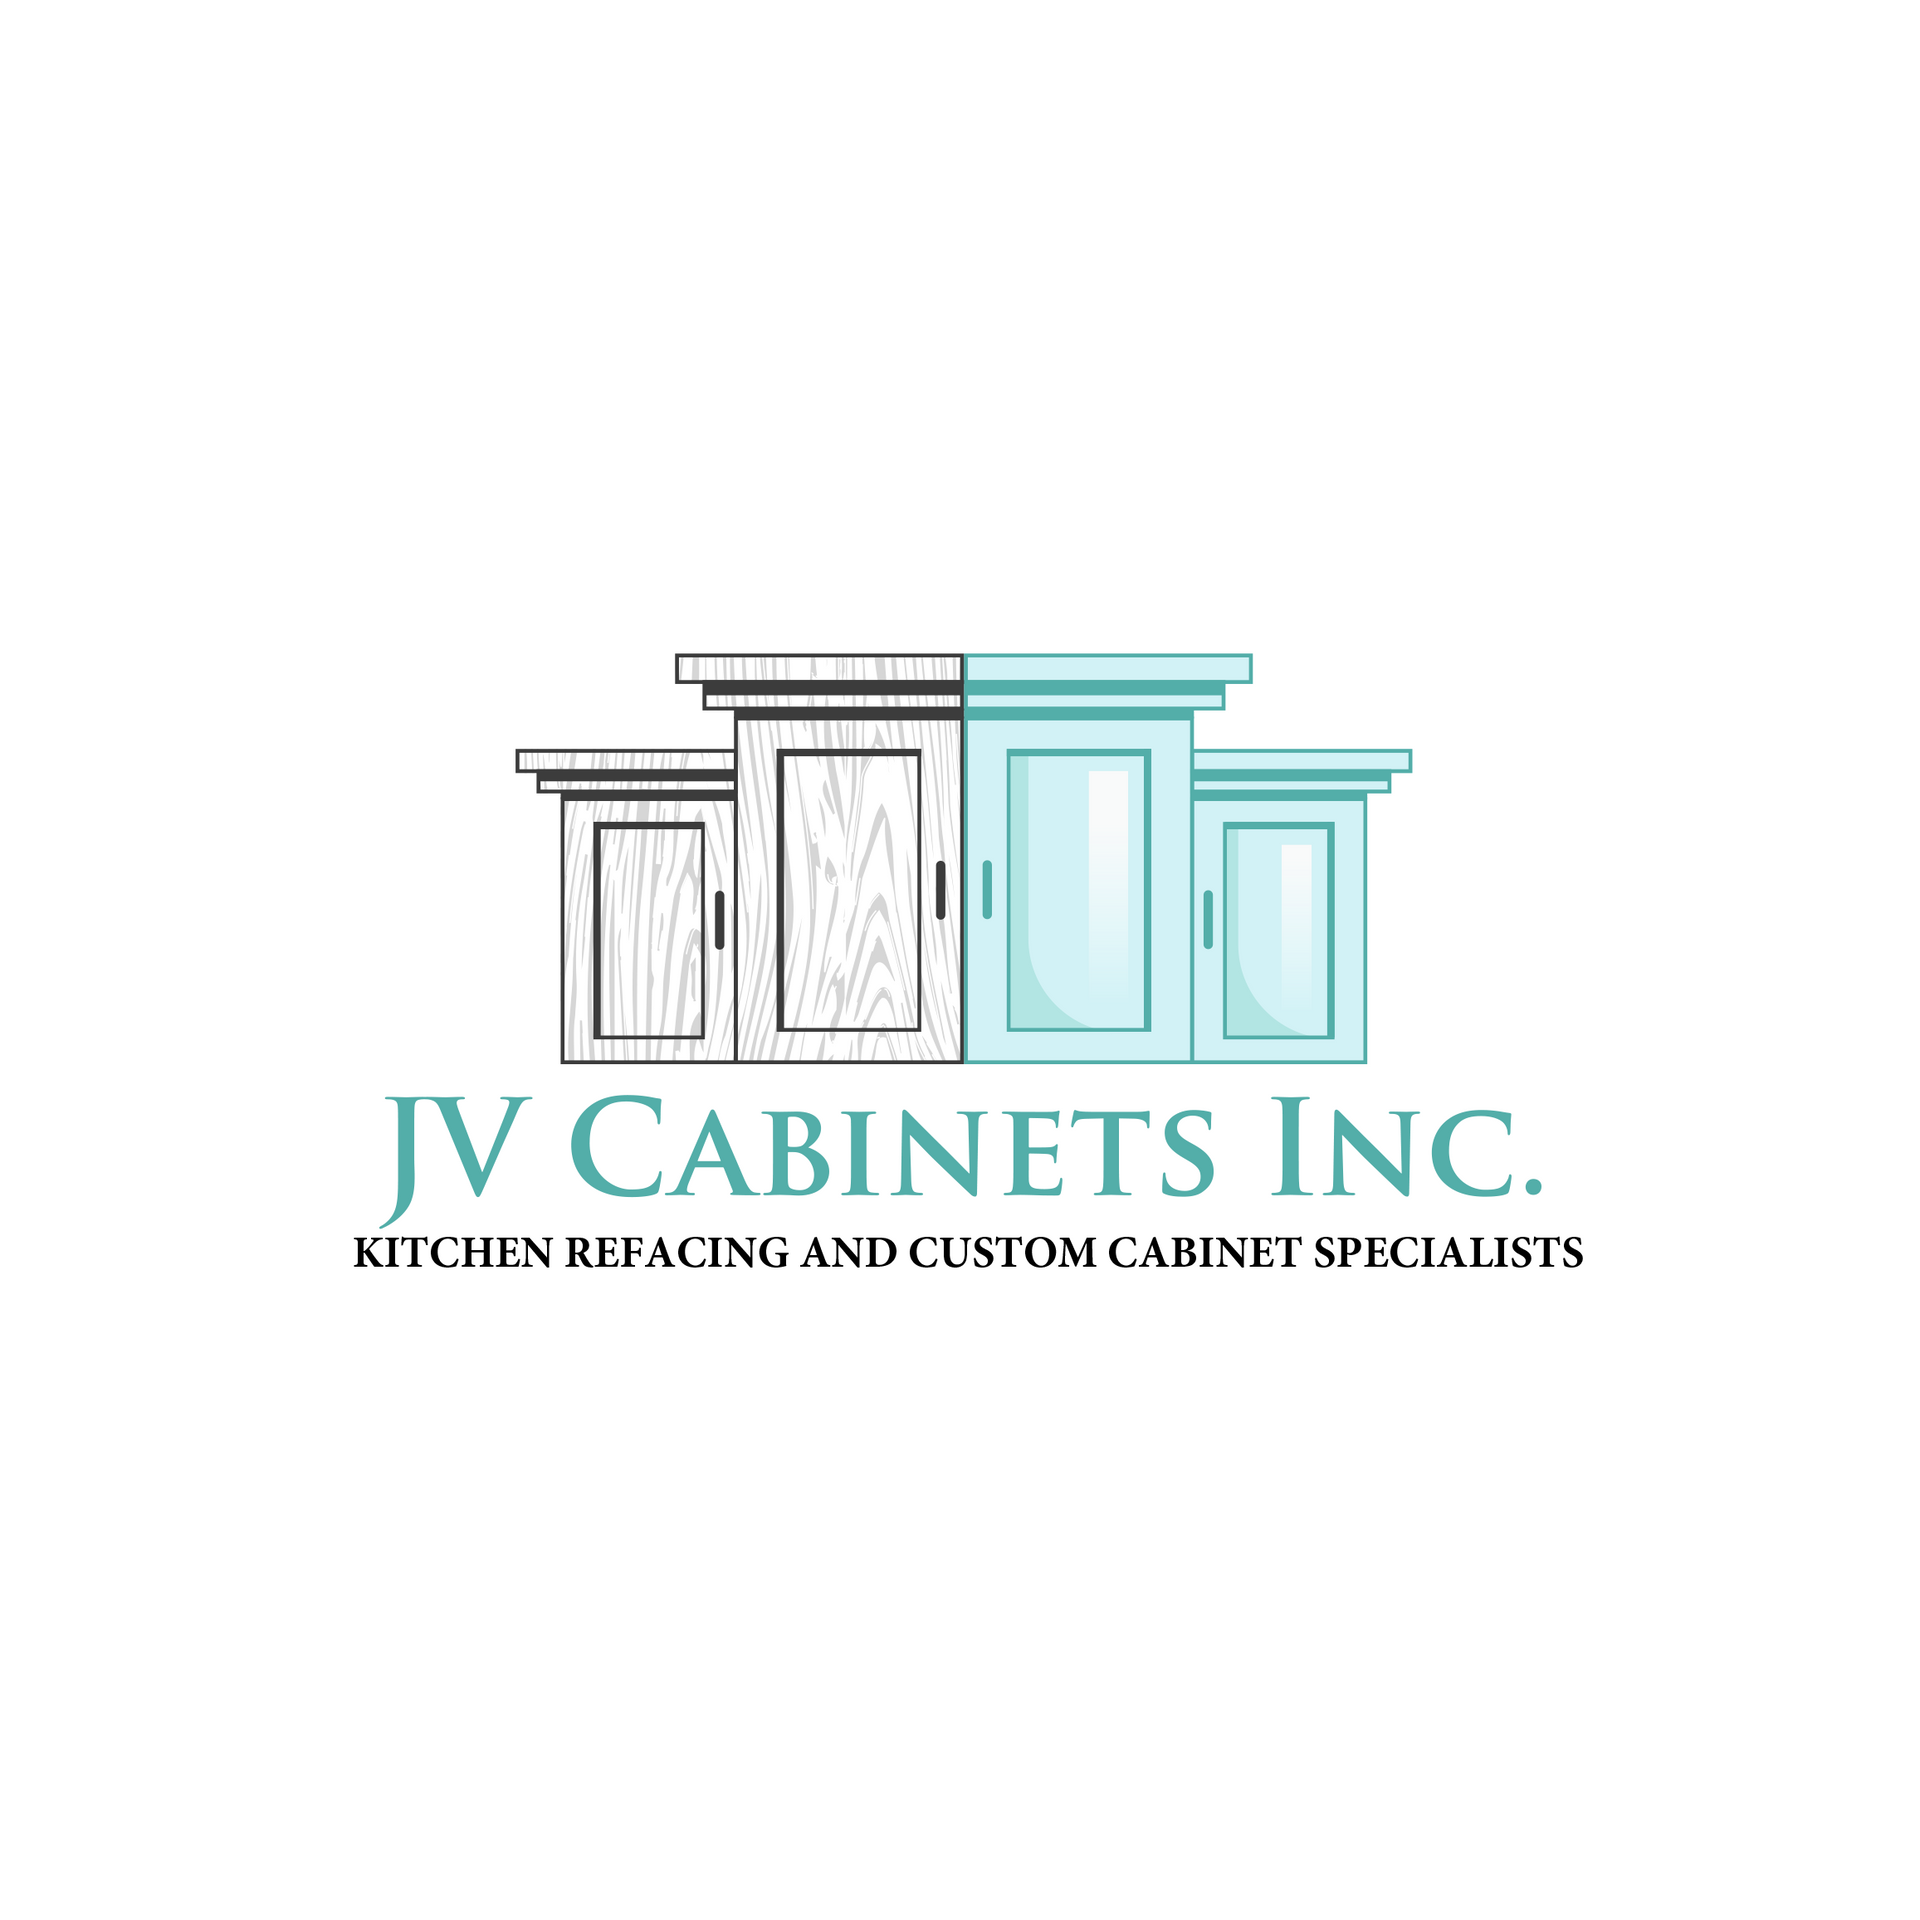 A logo for jv cabinets inc. kitchen refacing and custom cabinet specialists.